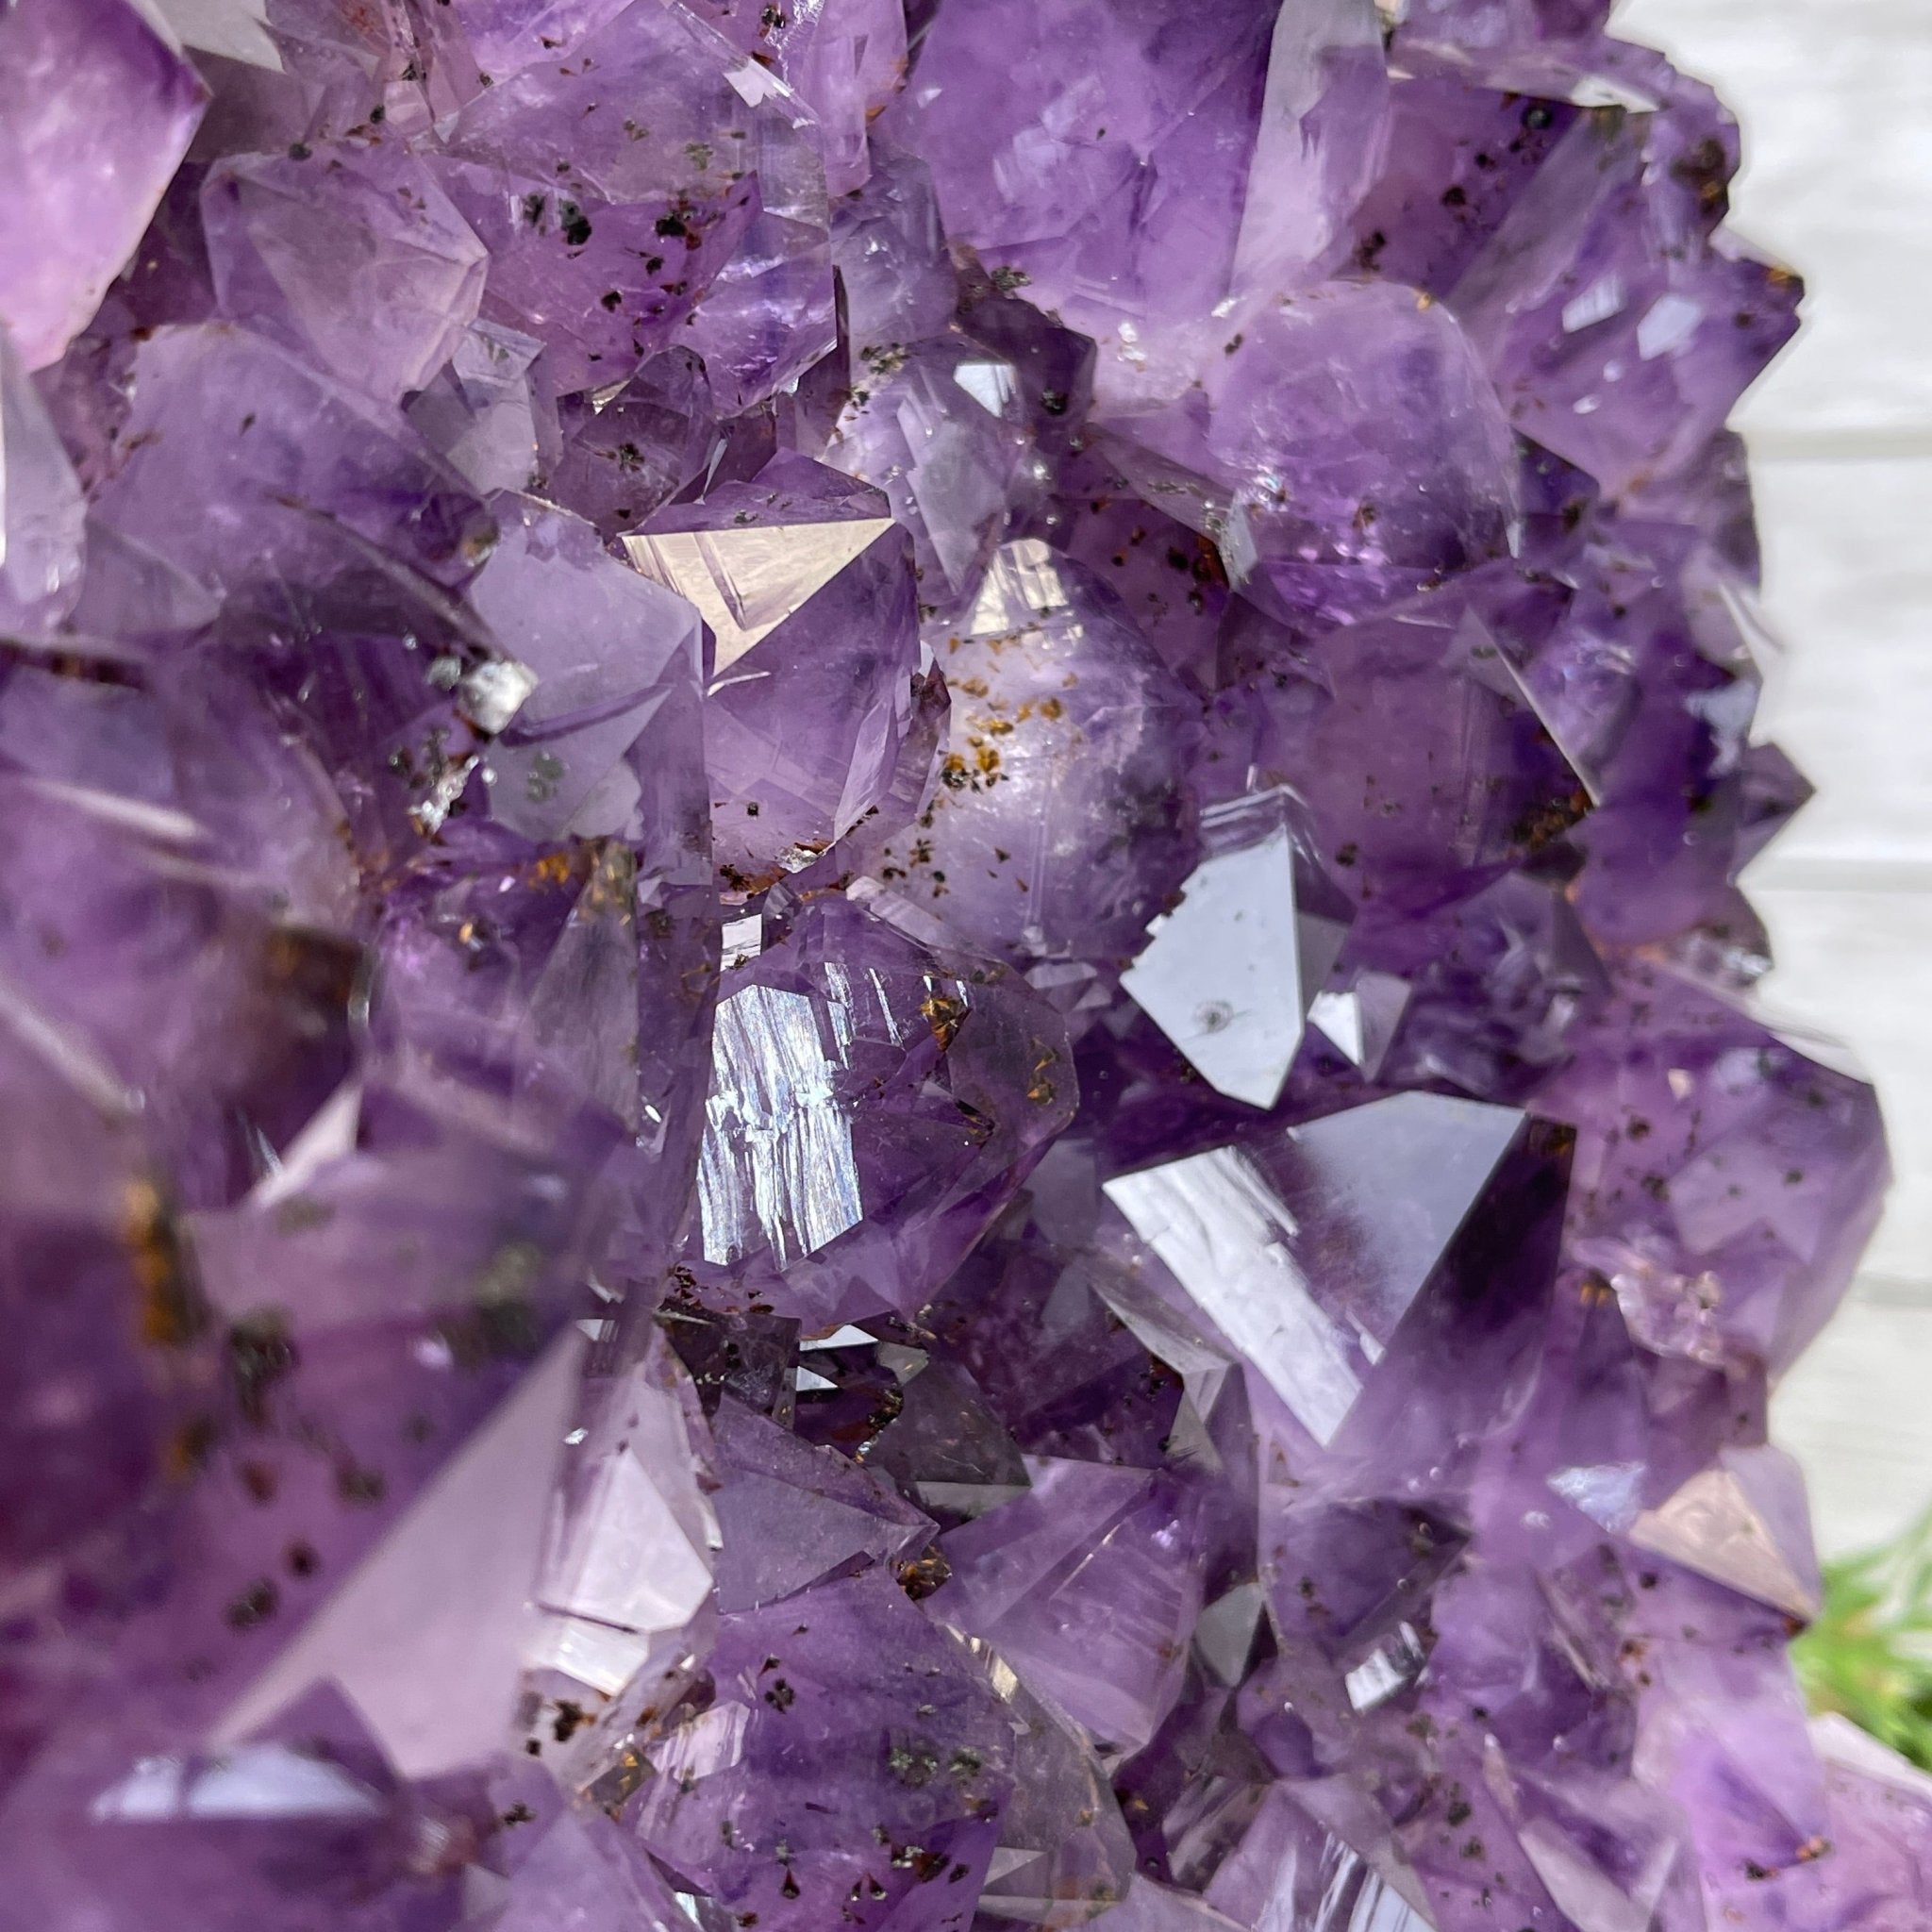 Extra Quality Amethyst Druse Cluster on Cement Base, 24 lbs and 10.5" Tall #5614-0026 - Brazil GemsBrazil GemsExtra Quality Amethyst Druse Cluster on Cement Base, 24 lbs and 10.5" Tall #5614-0026Clusters on Cement Bases5614-0026